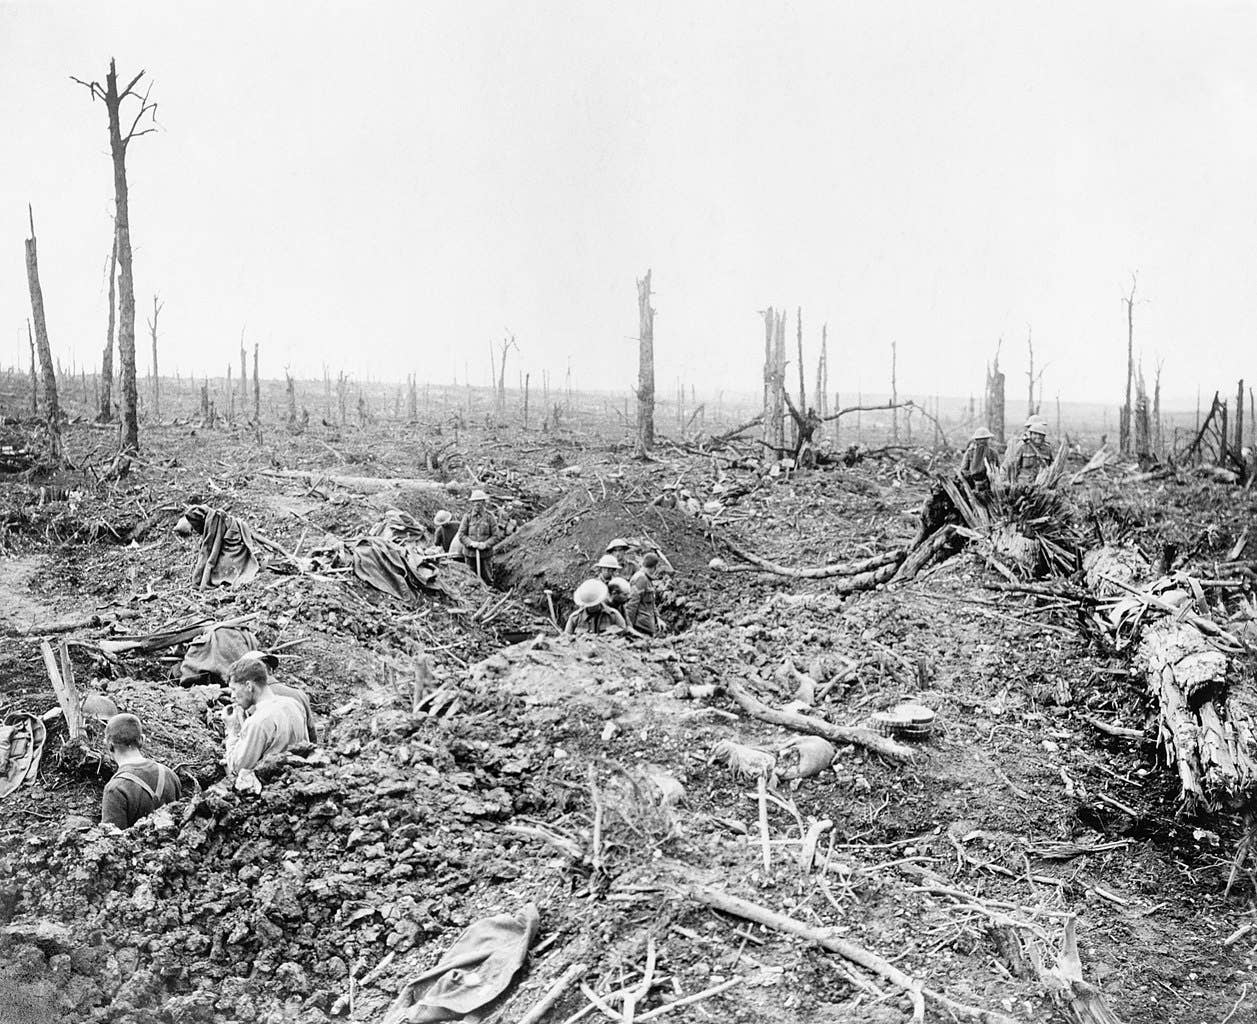 The Battle of the Somme, July-november 1916
Battle of Bazentin Ridge, 14-17 July 1916. Soldiers digging a communication trench through Delville Wood. An officer observing from the ruins of Longueval Church. (Imperial War Museum)